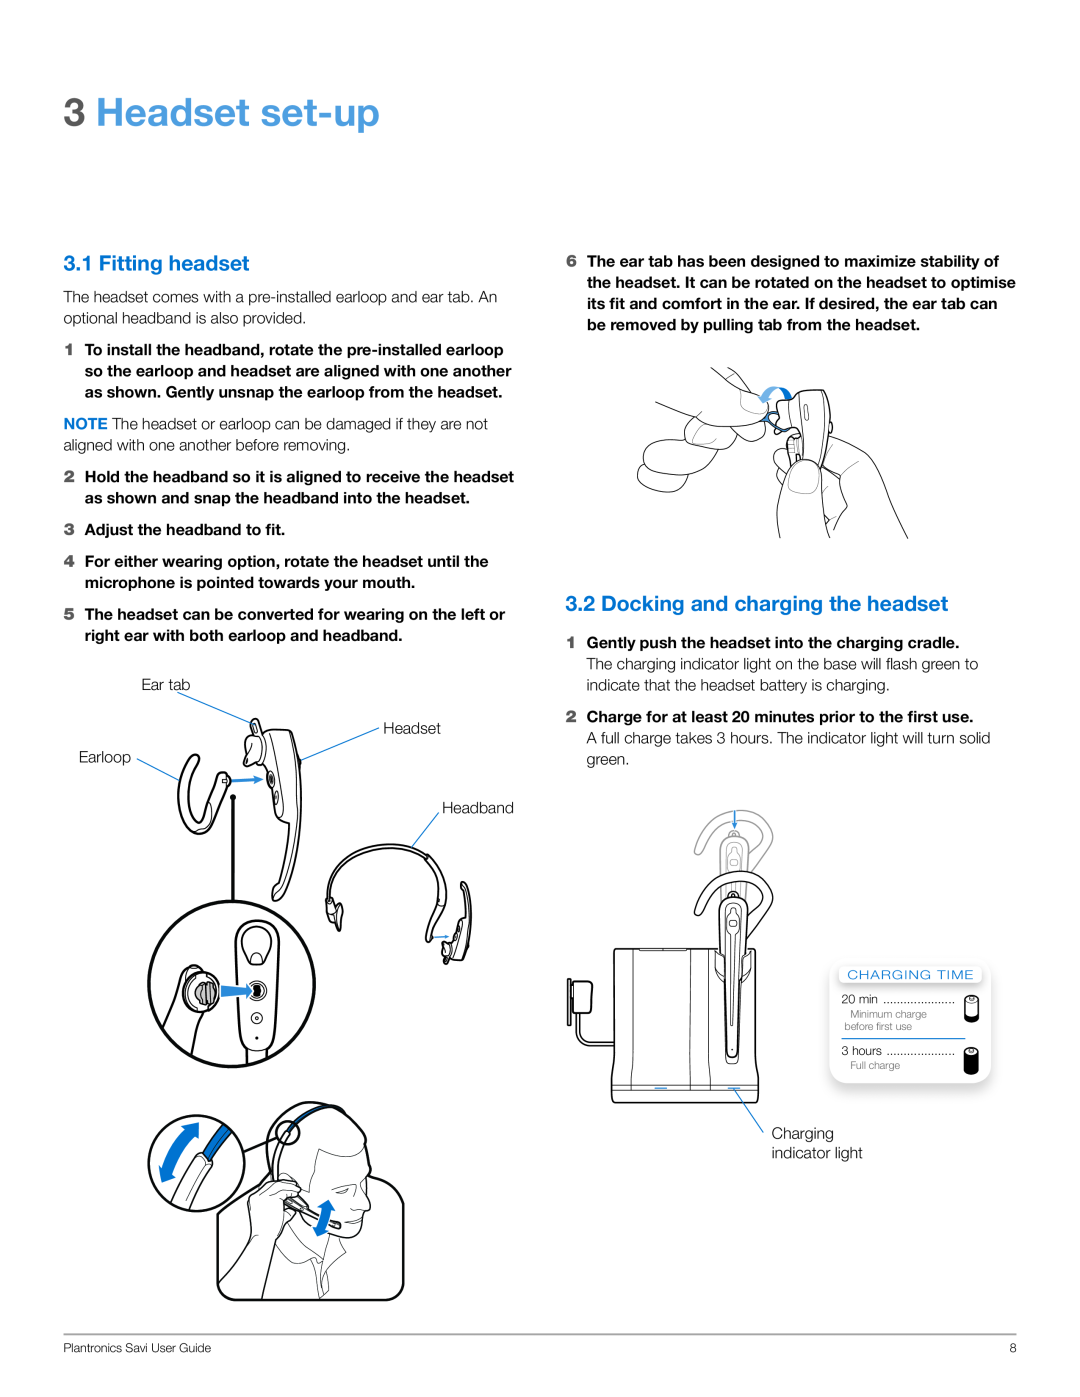 Plantronics WO100 manual Headset set-up, Fitting headset, Docking and charging the headset 